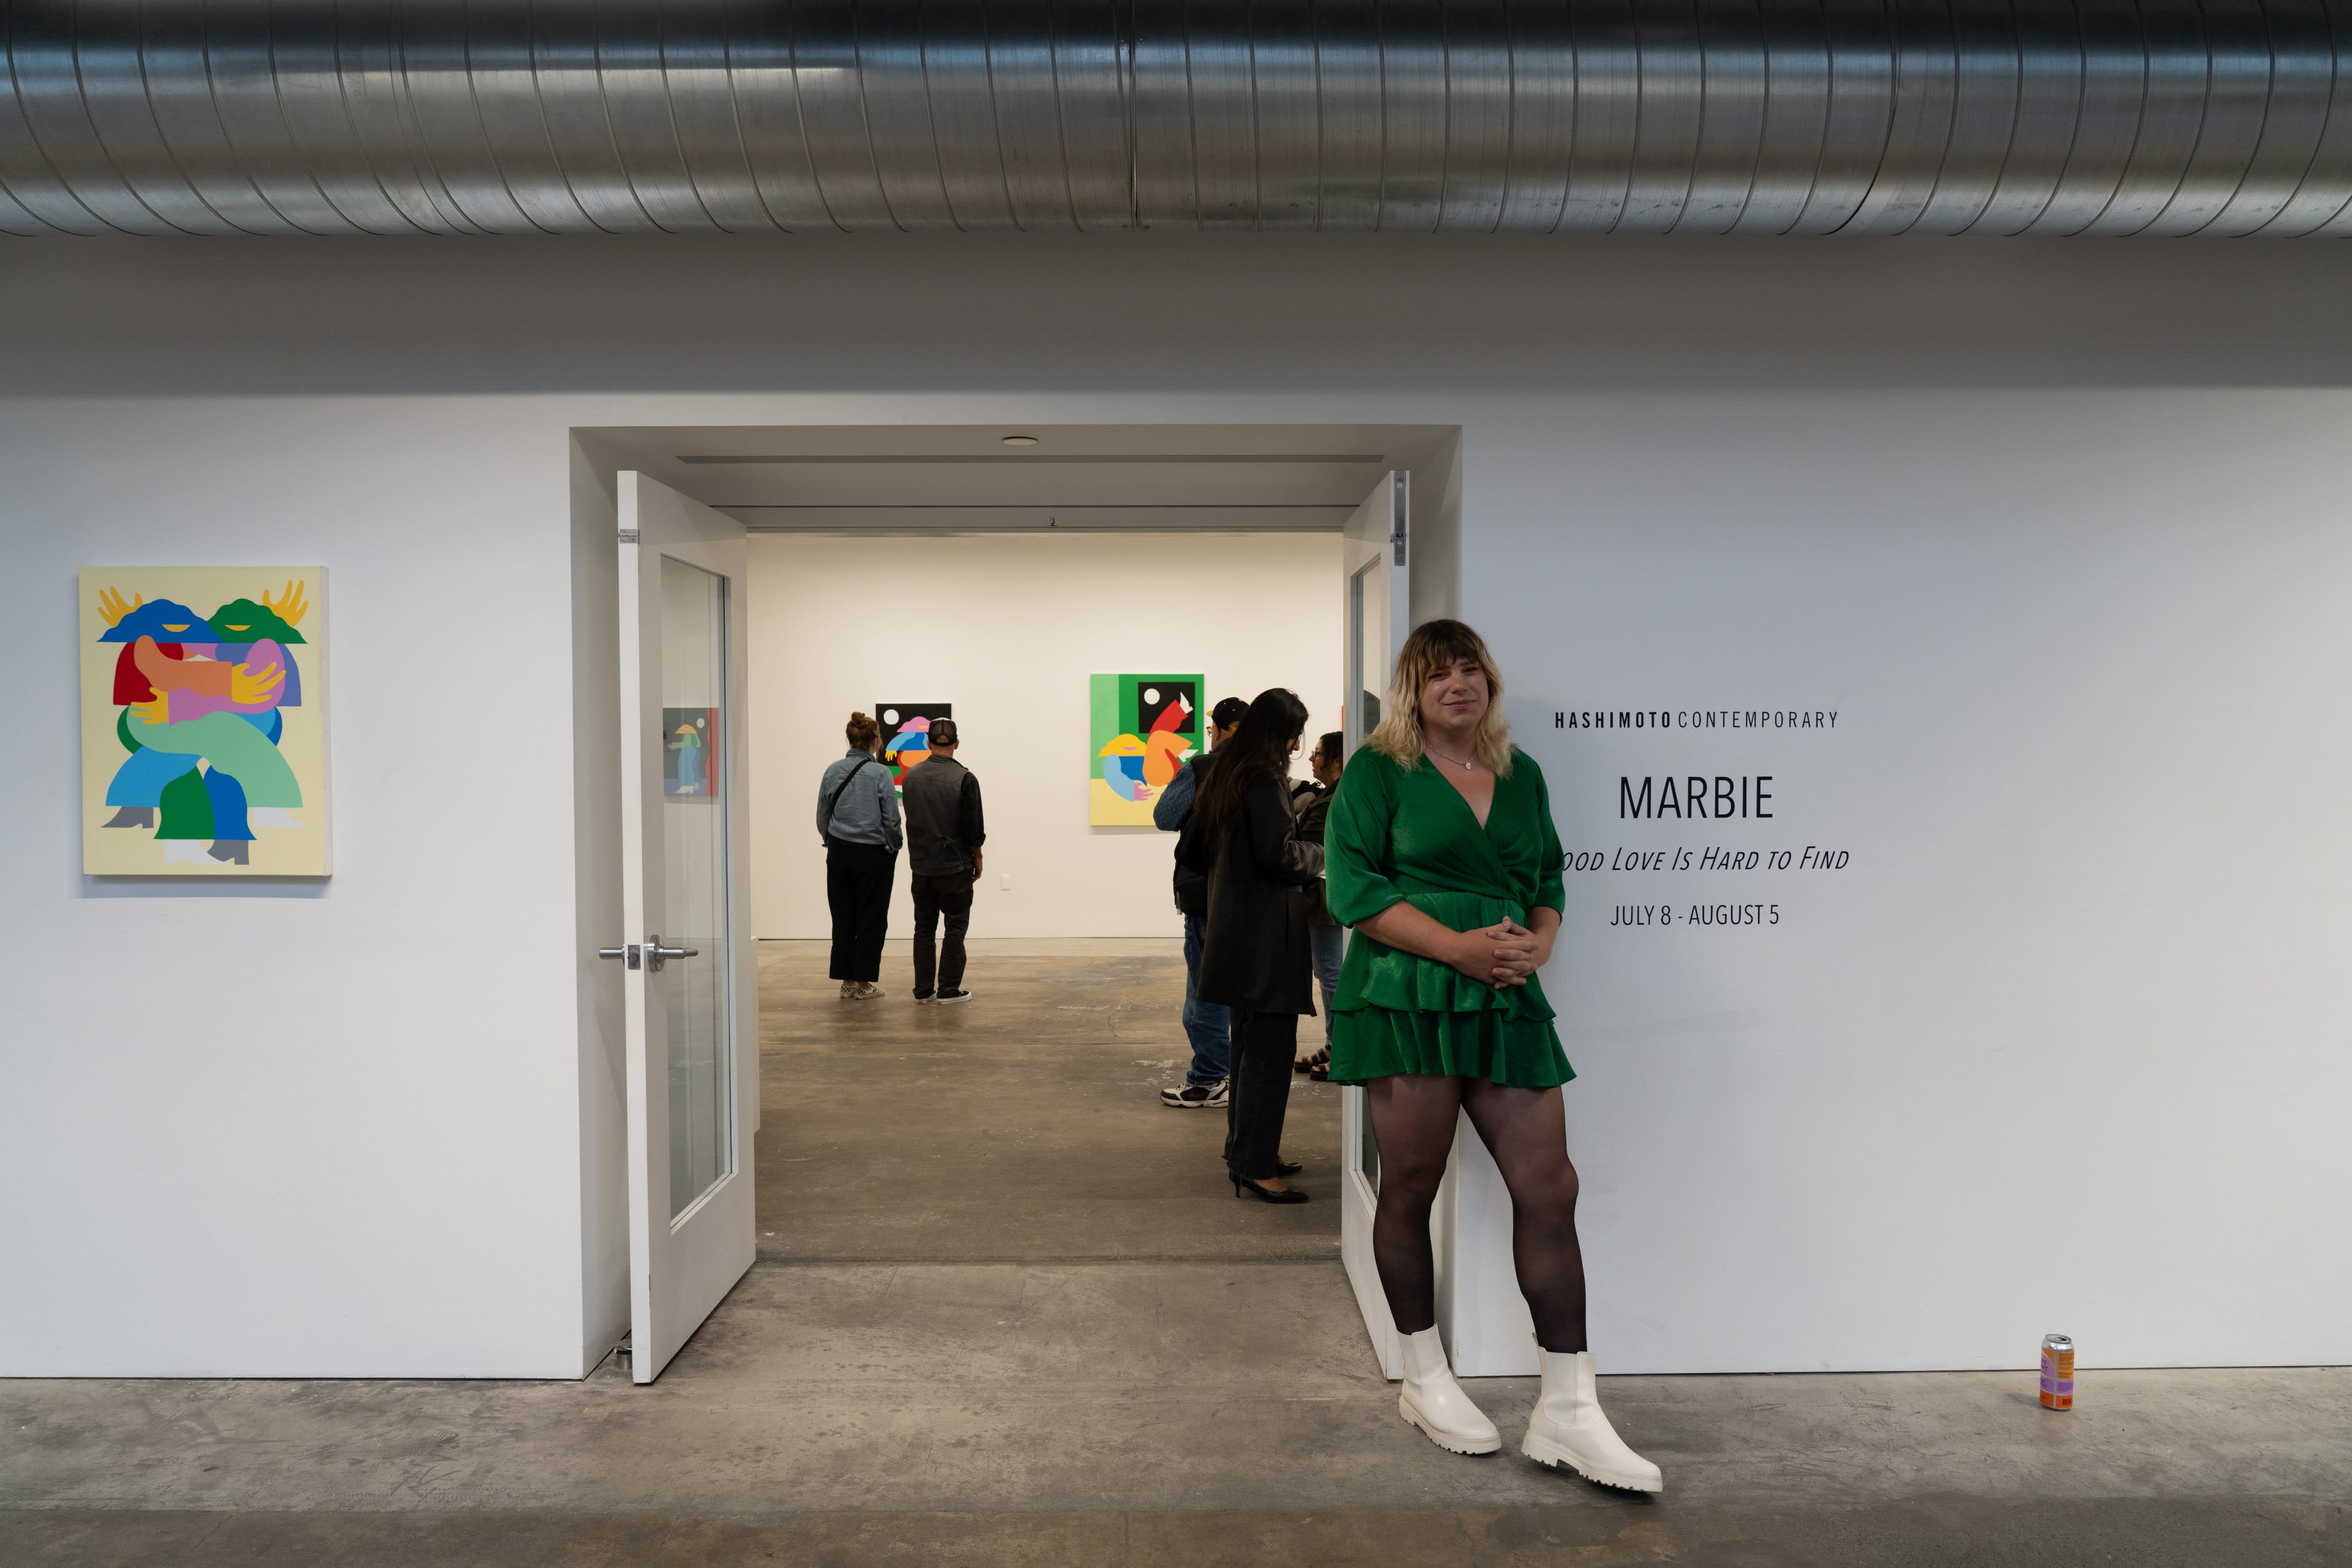 Marbie stands in front of the doorway to her painting show, wearing a green velvet skater dress, black tights, and white boots